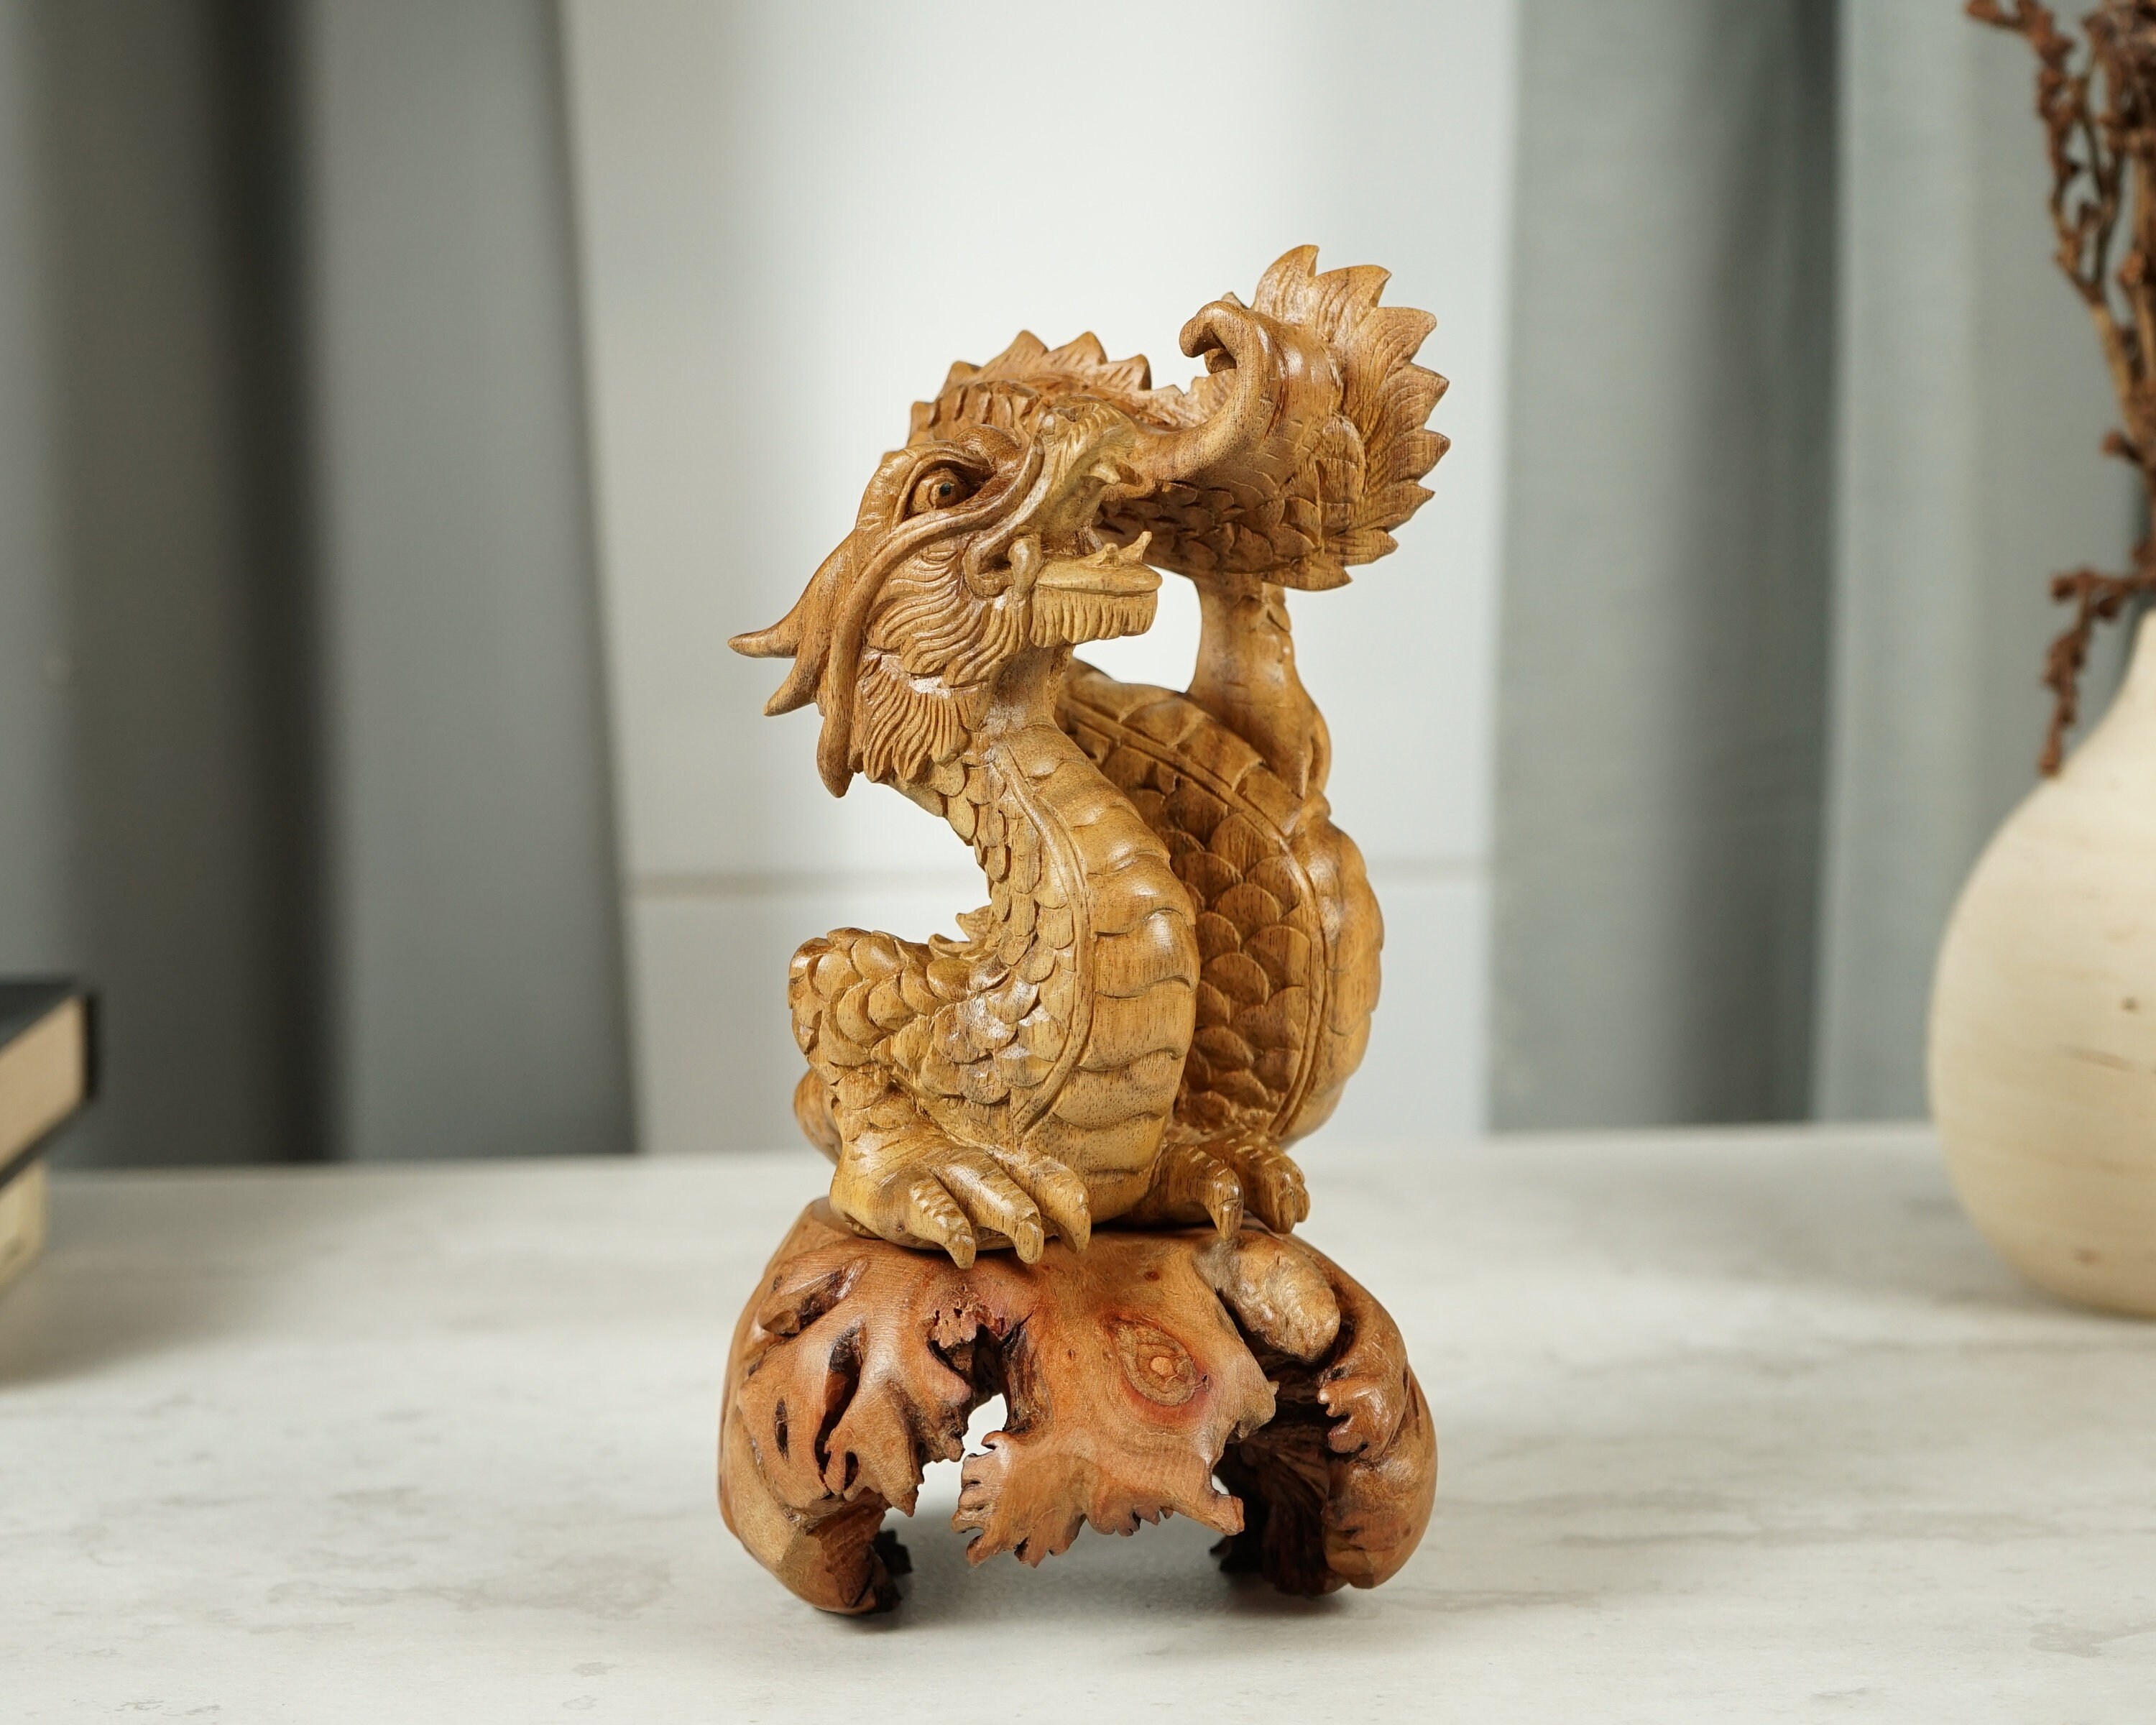 Wooden Dragon Statue, Unique Sculpture, Chinese Dragon, Mystical Animal,  Unique, Handmade, Art, Home Decor, Gift for Him, Birthday Gift 